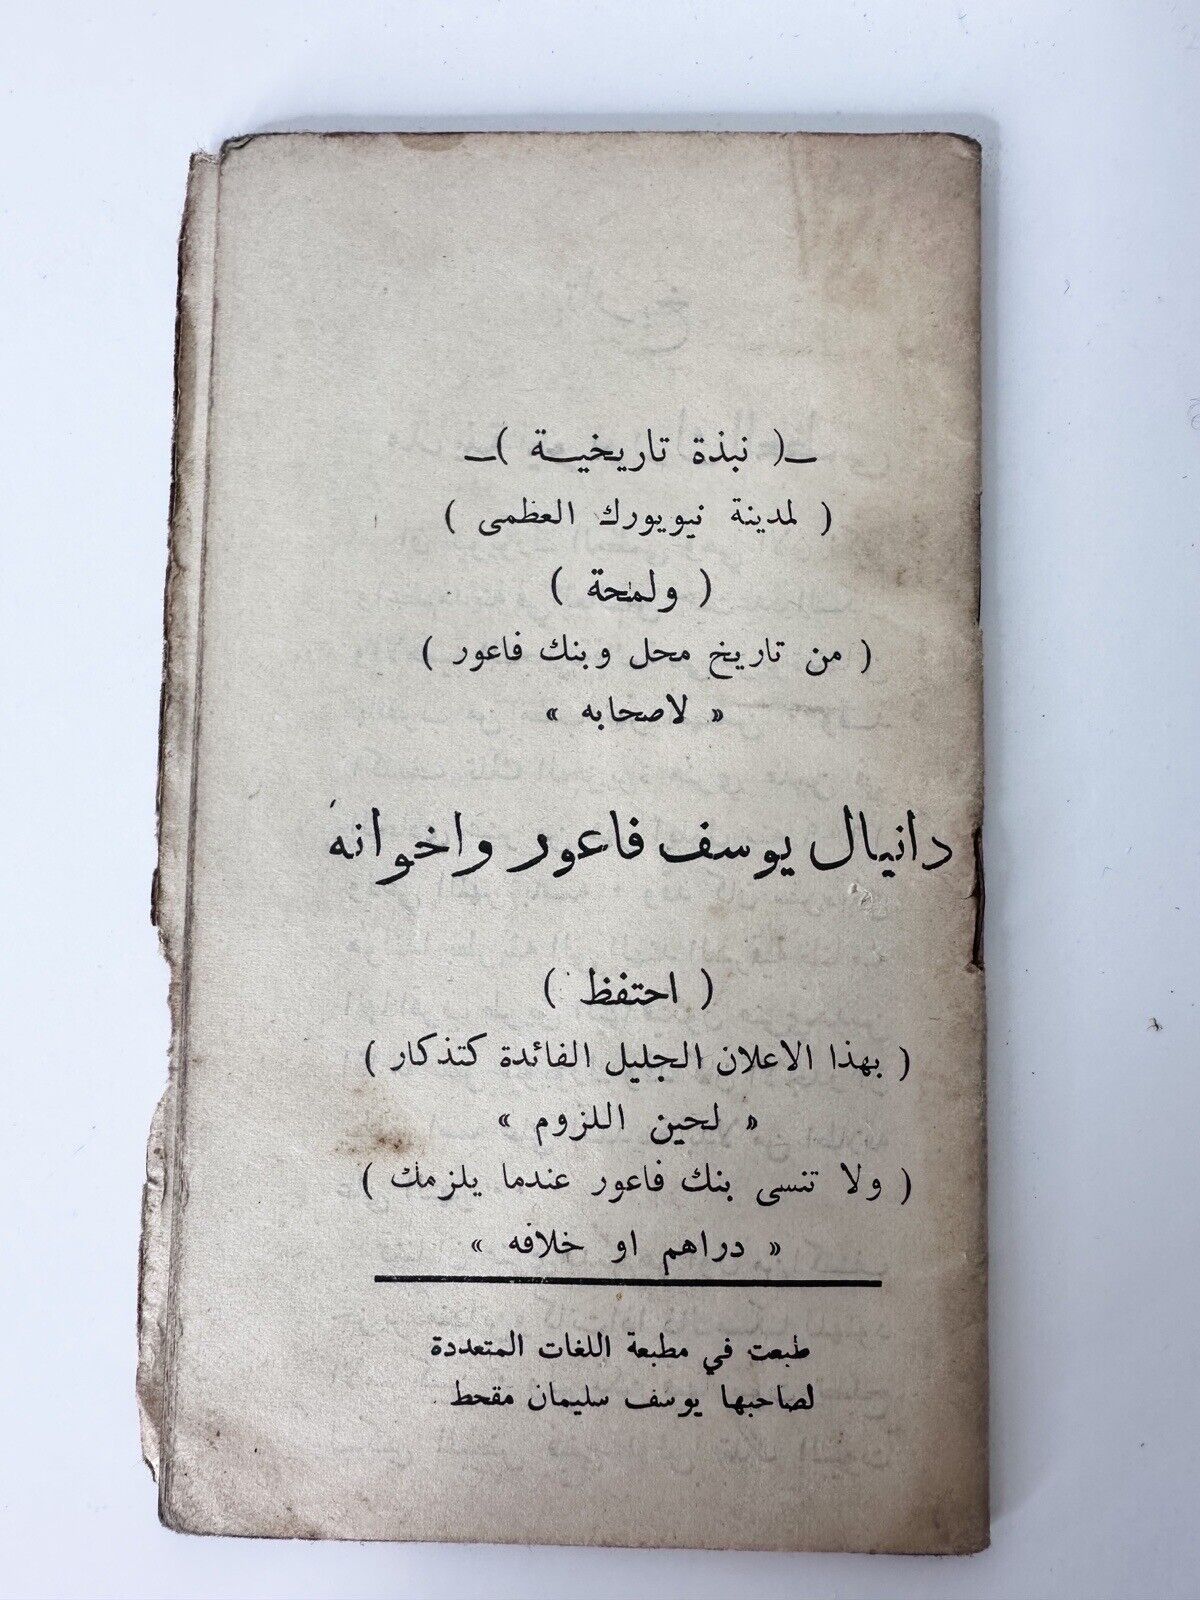 Arabic: A Historical Brief of NY & Faour Shop, Daniel Youssef Muqaht Post WWI